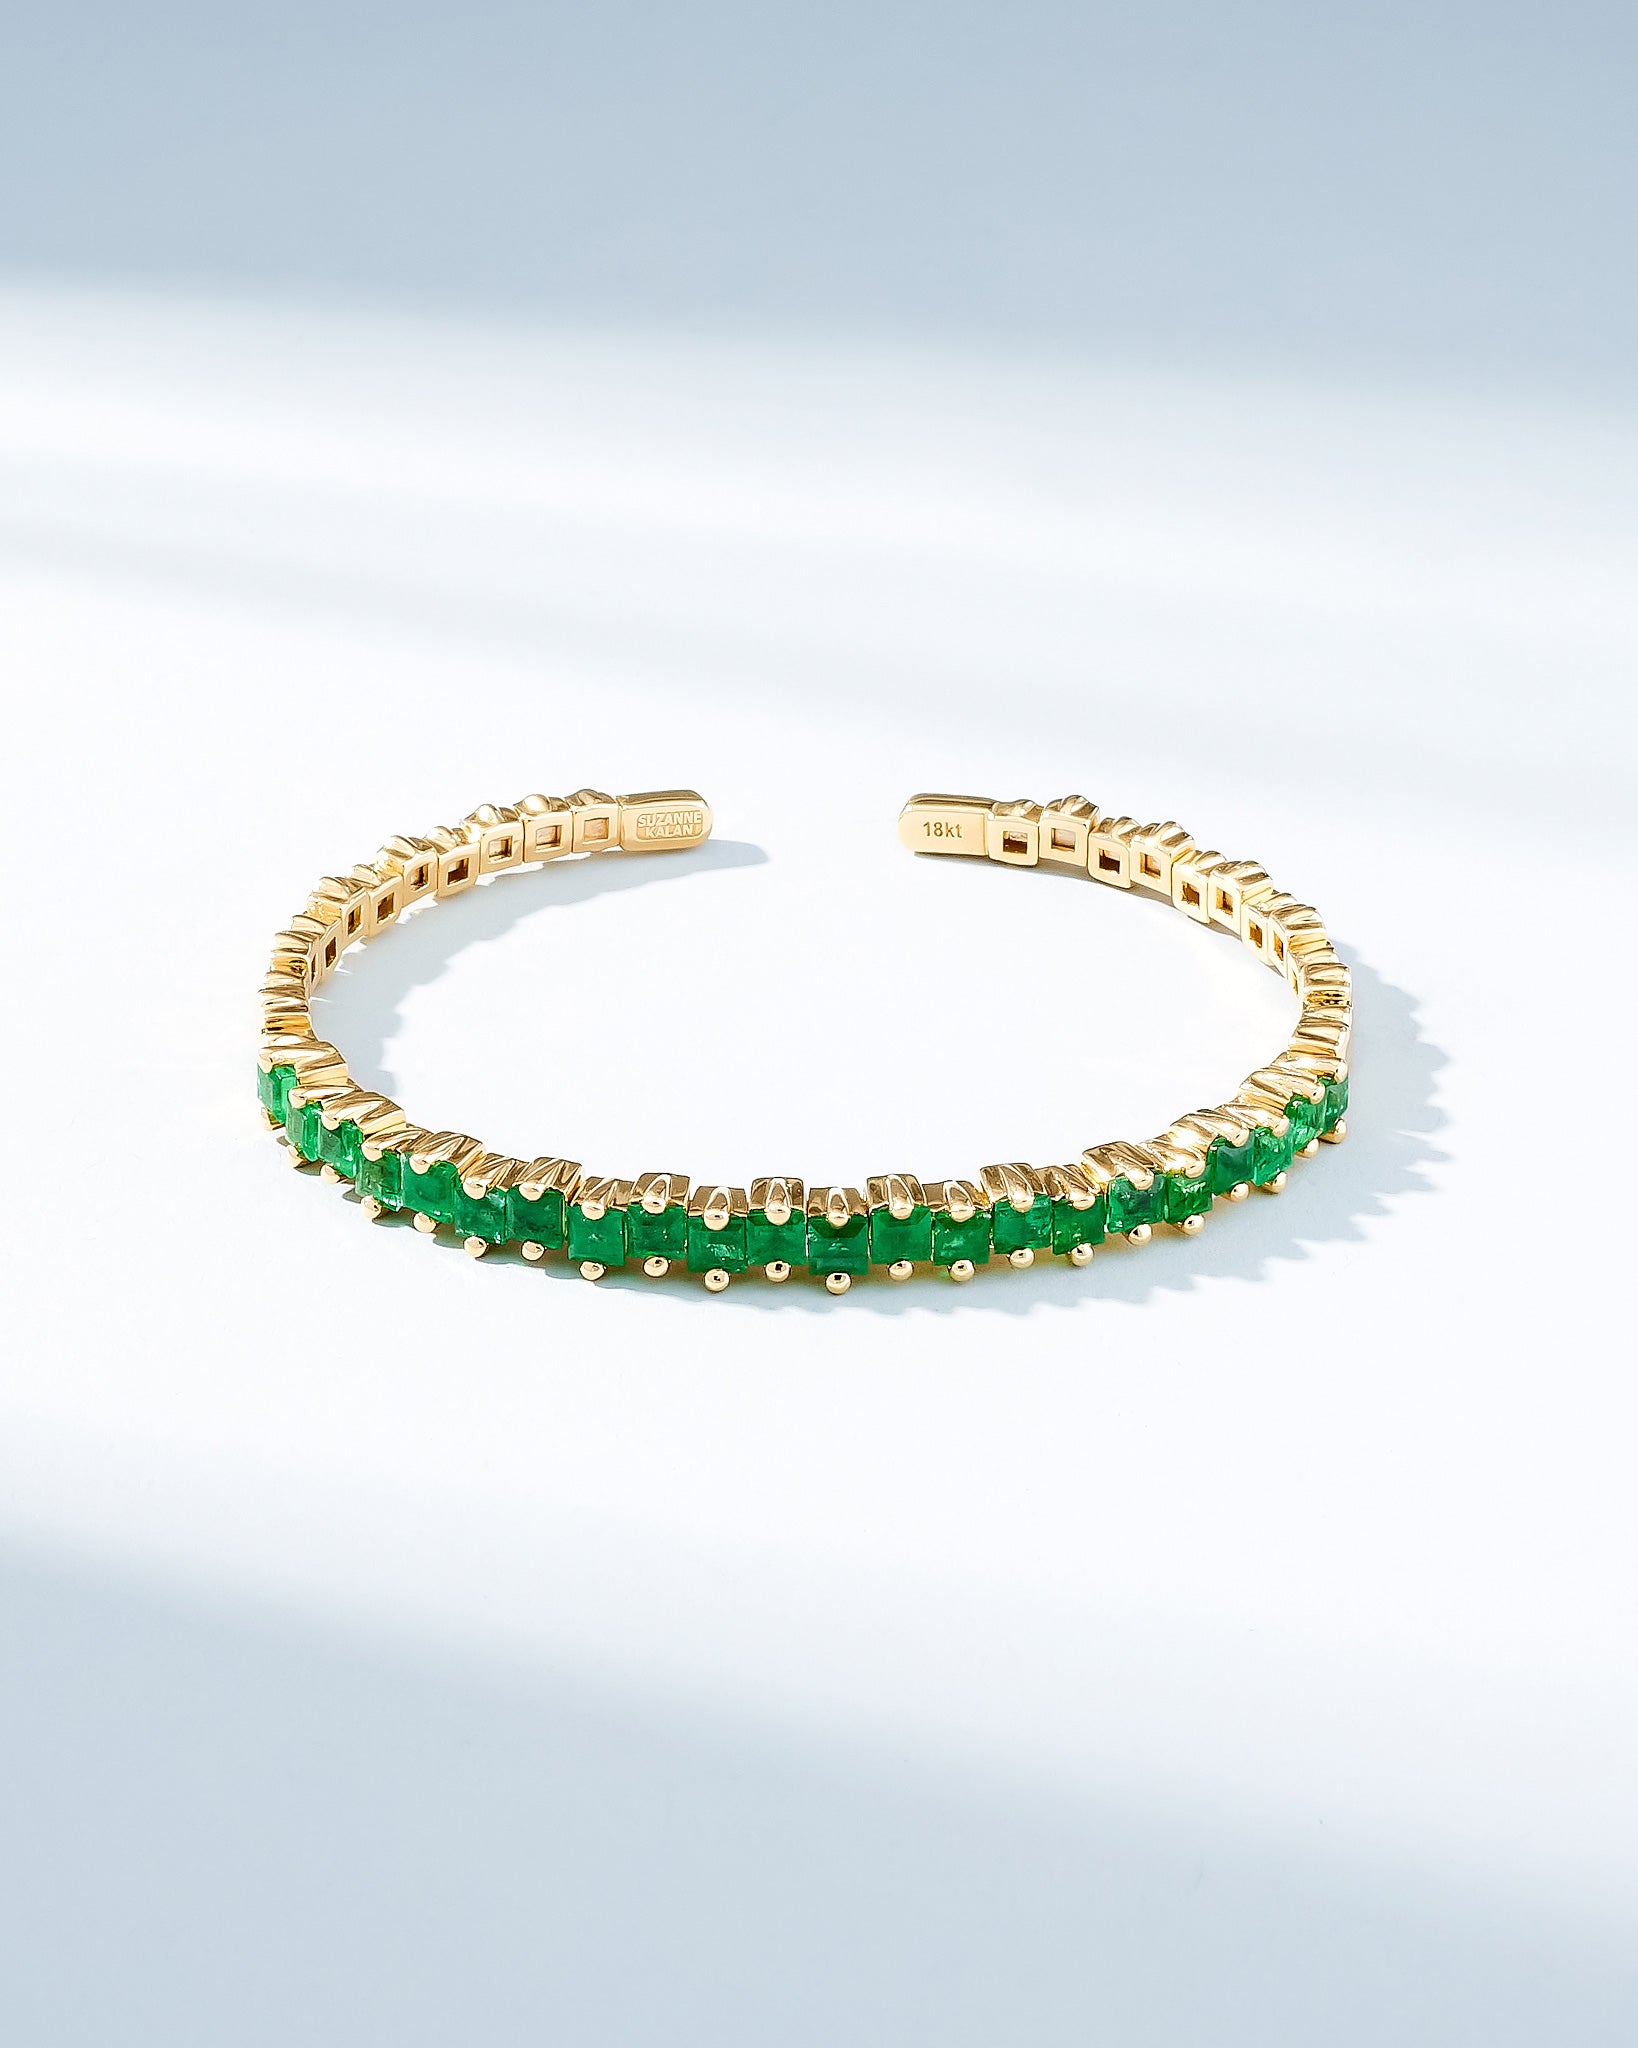 Suzanne Kalan Princess Staggered Emerald Bangle in 18k yellow gold